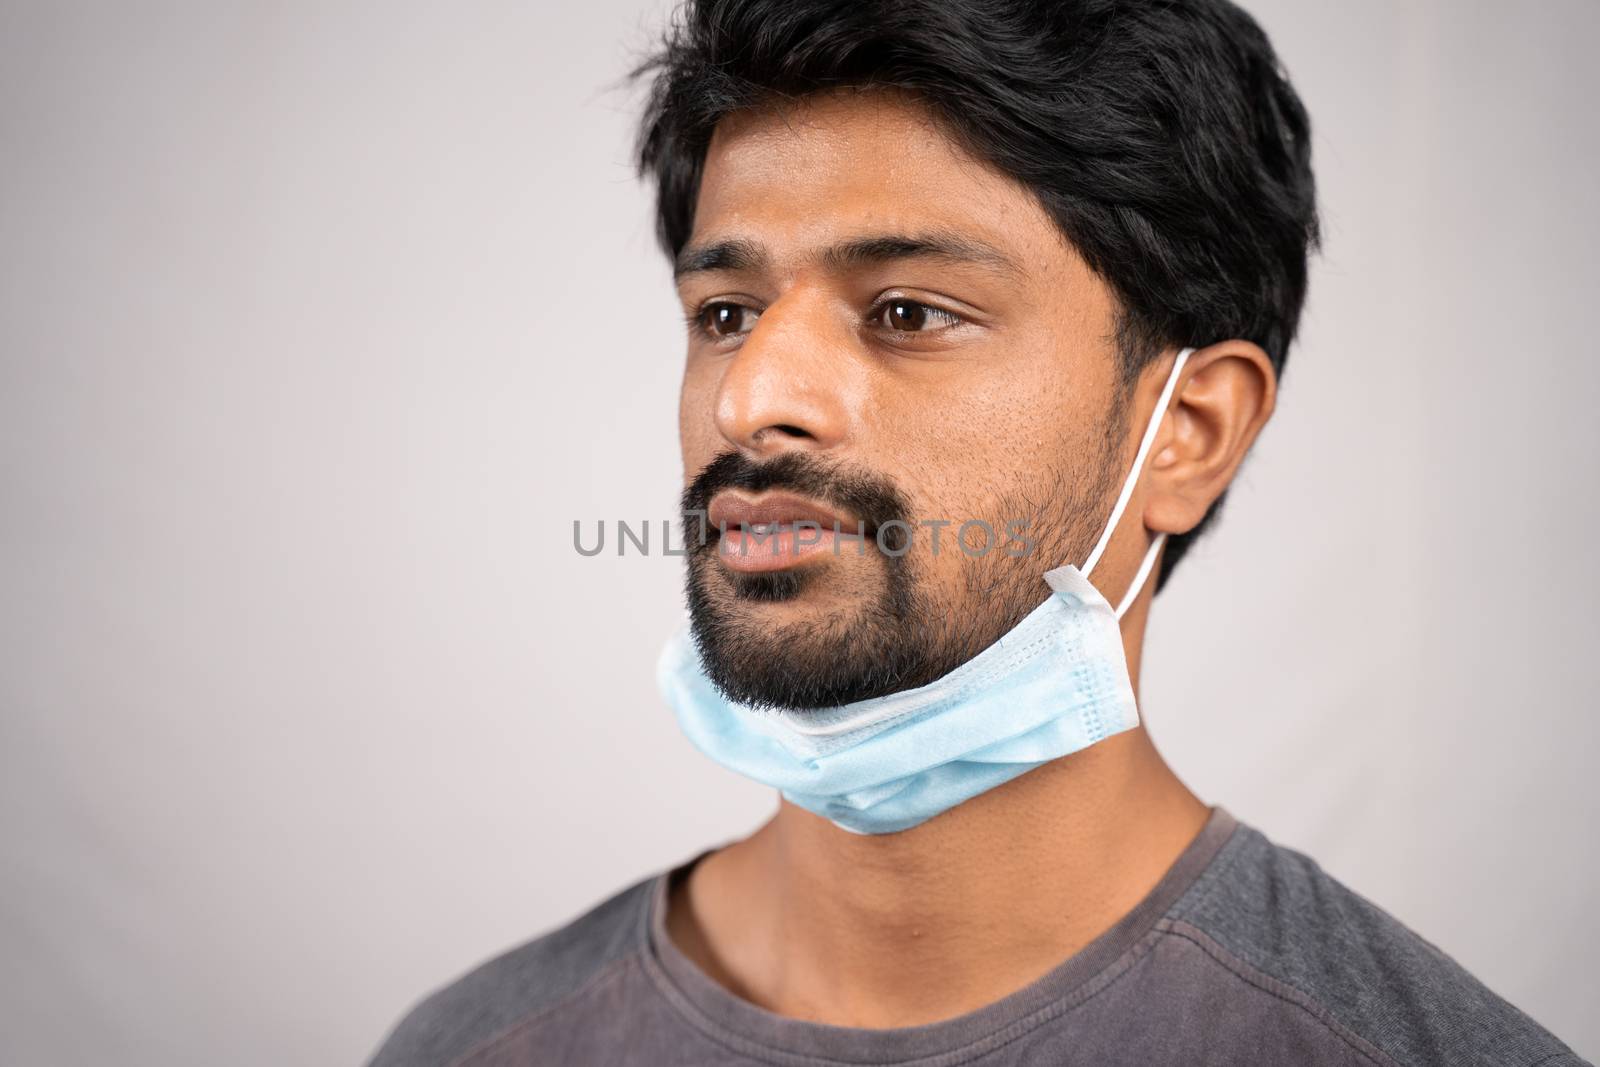 concept showing of improper way of using face masks during coronavirus or covid-19 crisis - young man wearing medical at neck on isolated background.